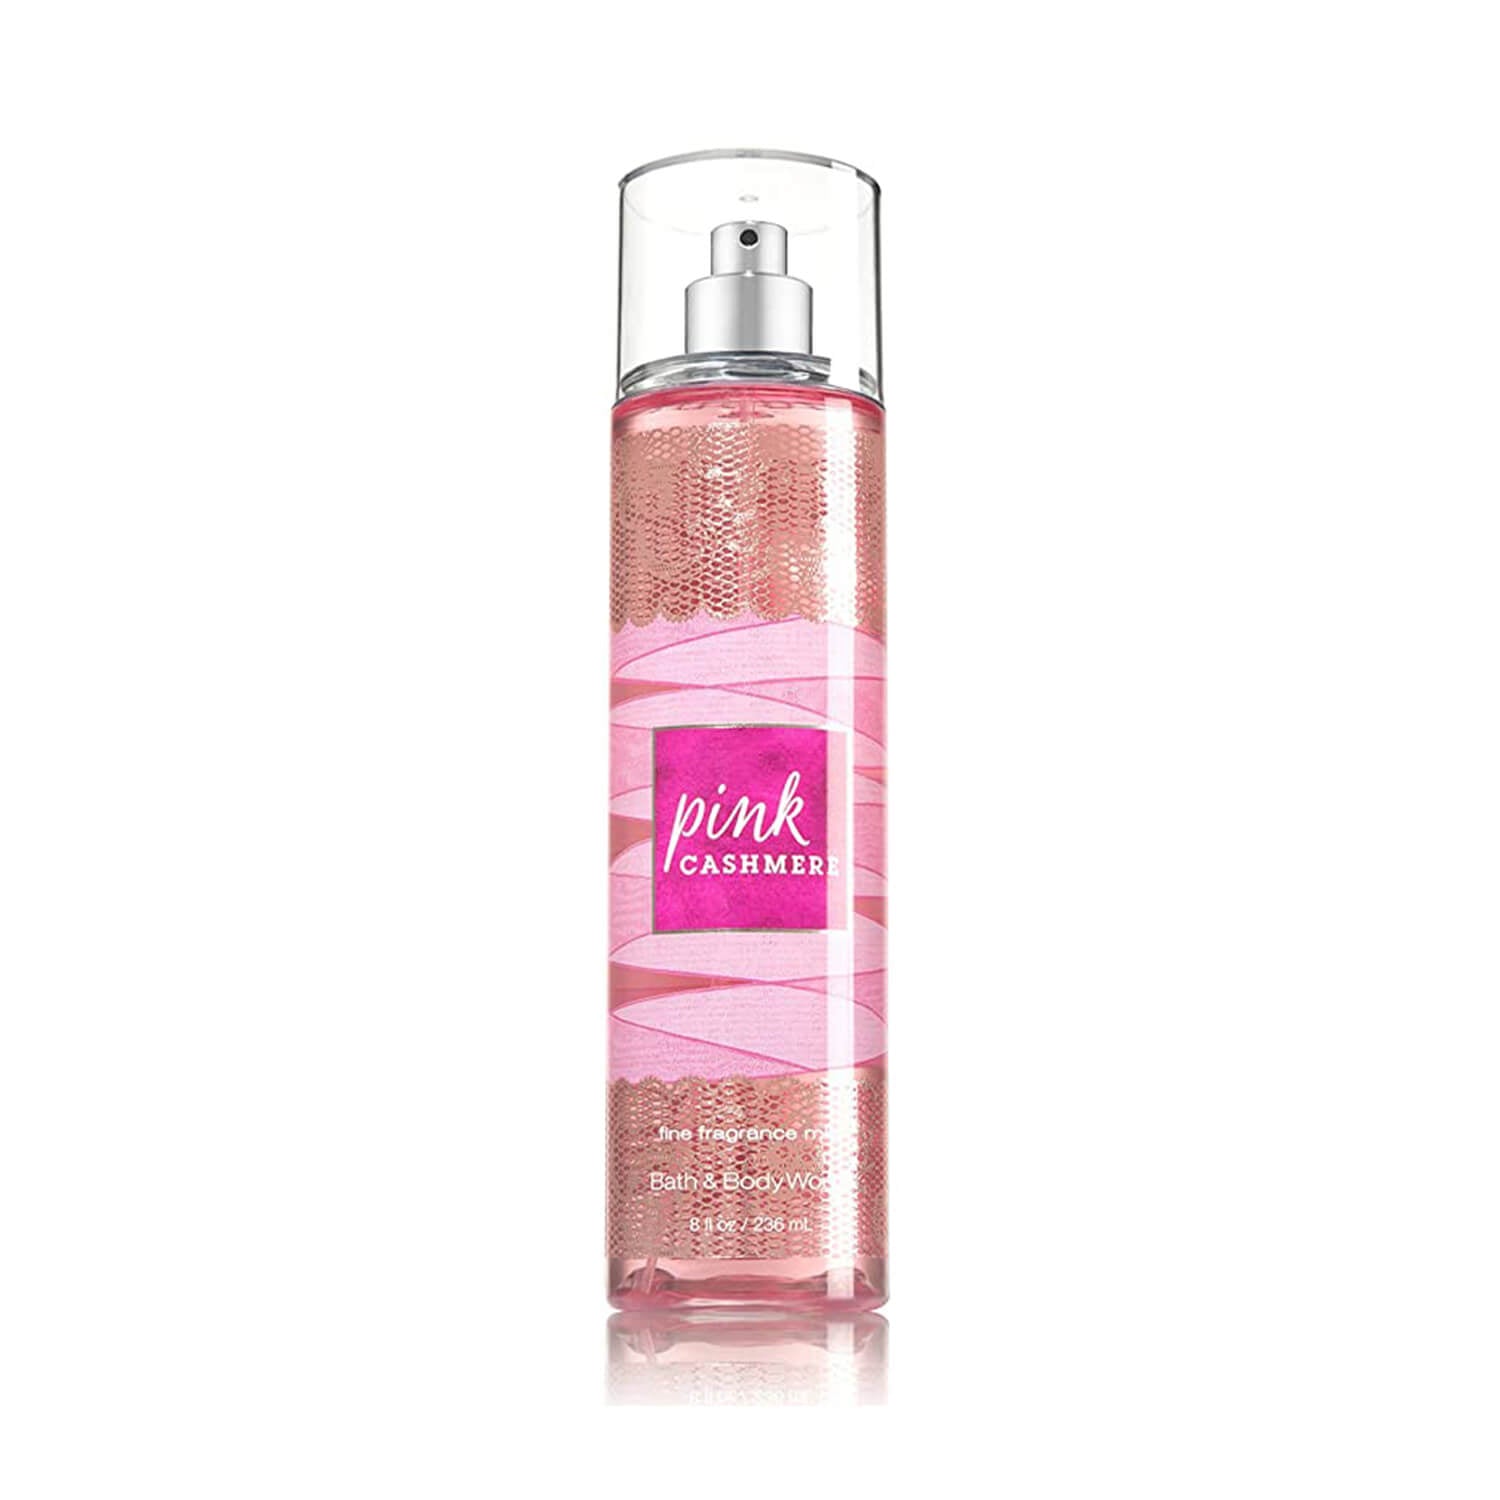 Buy Bath & Body Works fragrance mist in Pink Cashmere available at heygirl.pk for cash on delivery in Karachi, Lahore, Islamabad, Rawalpindi across Pakistan. 